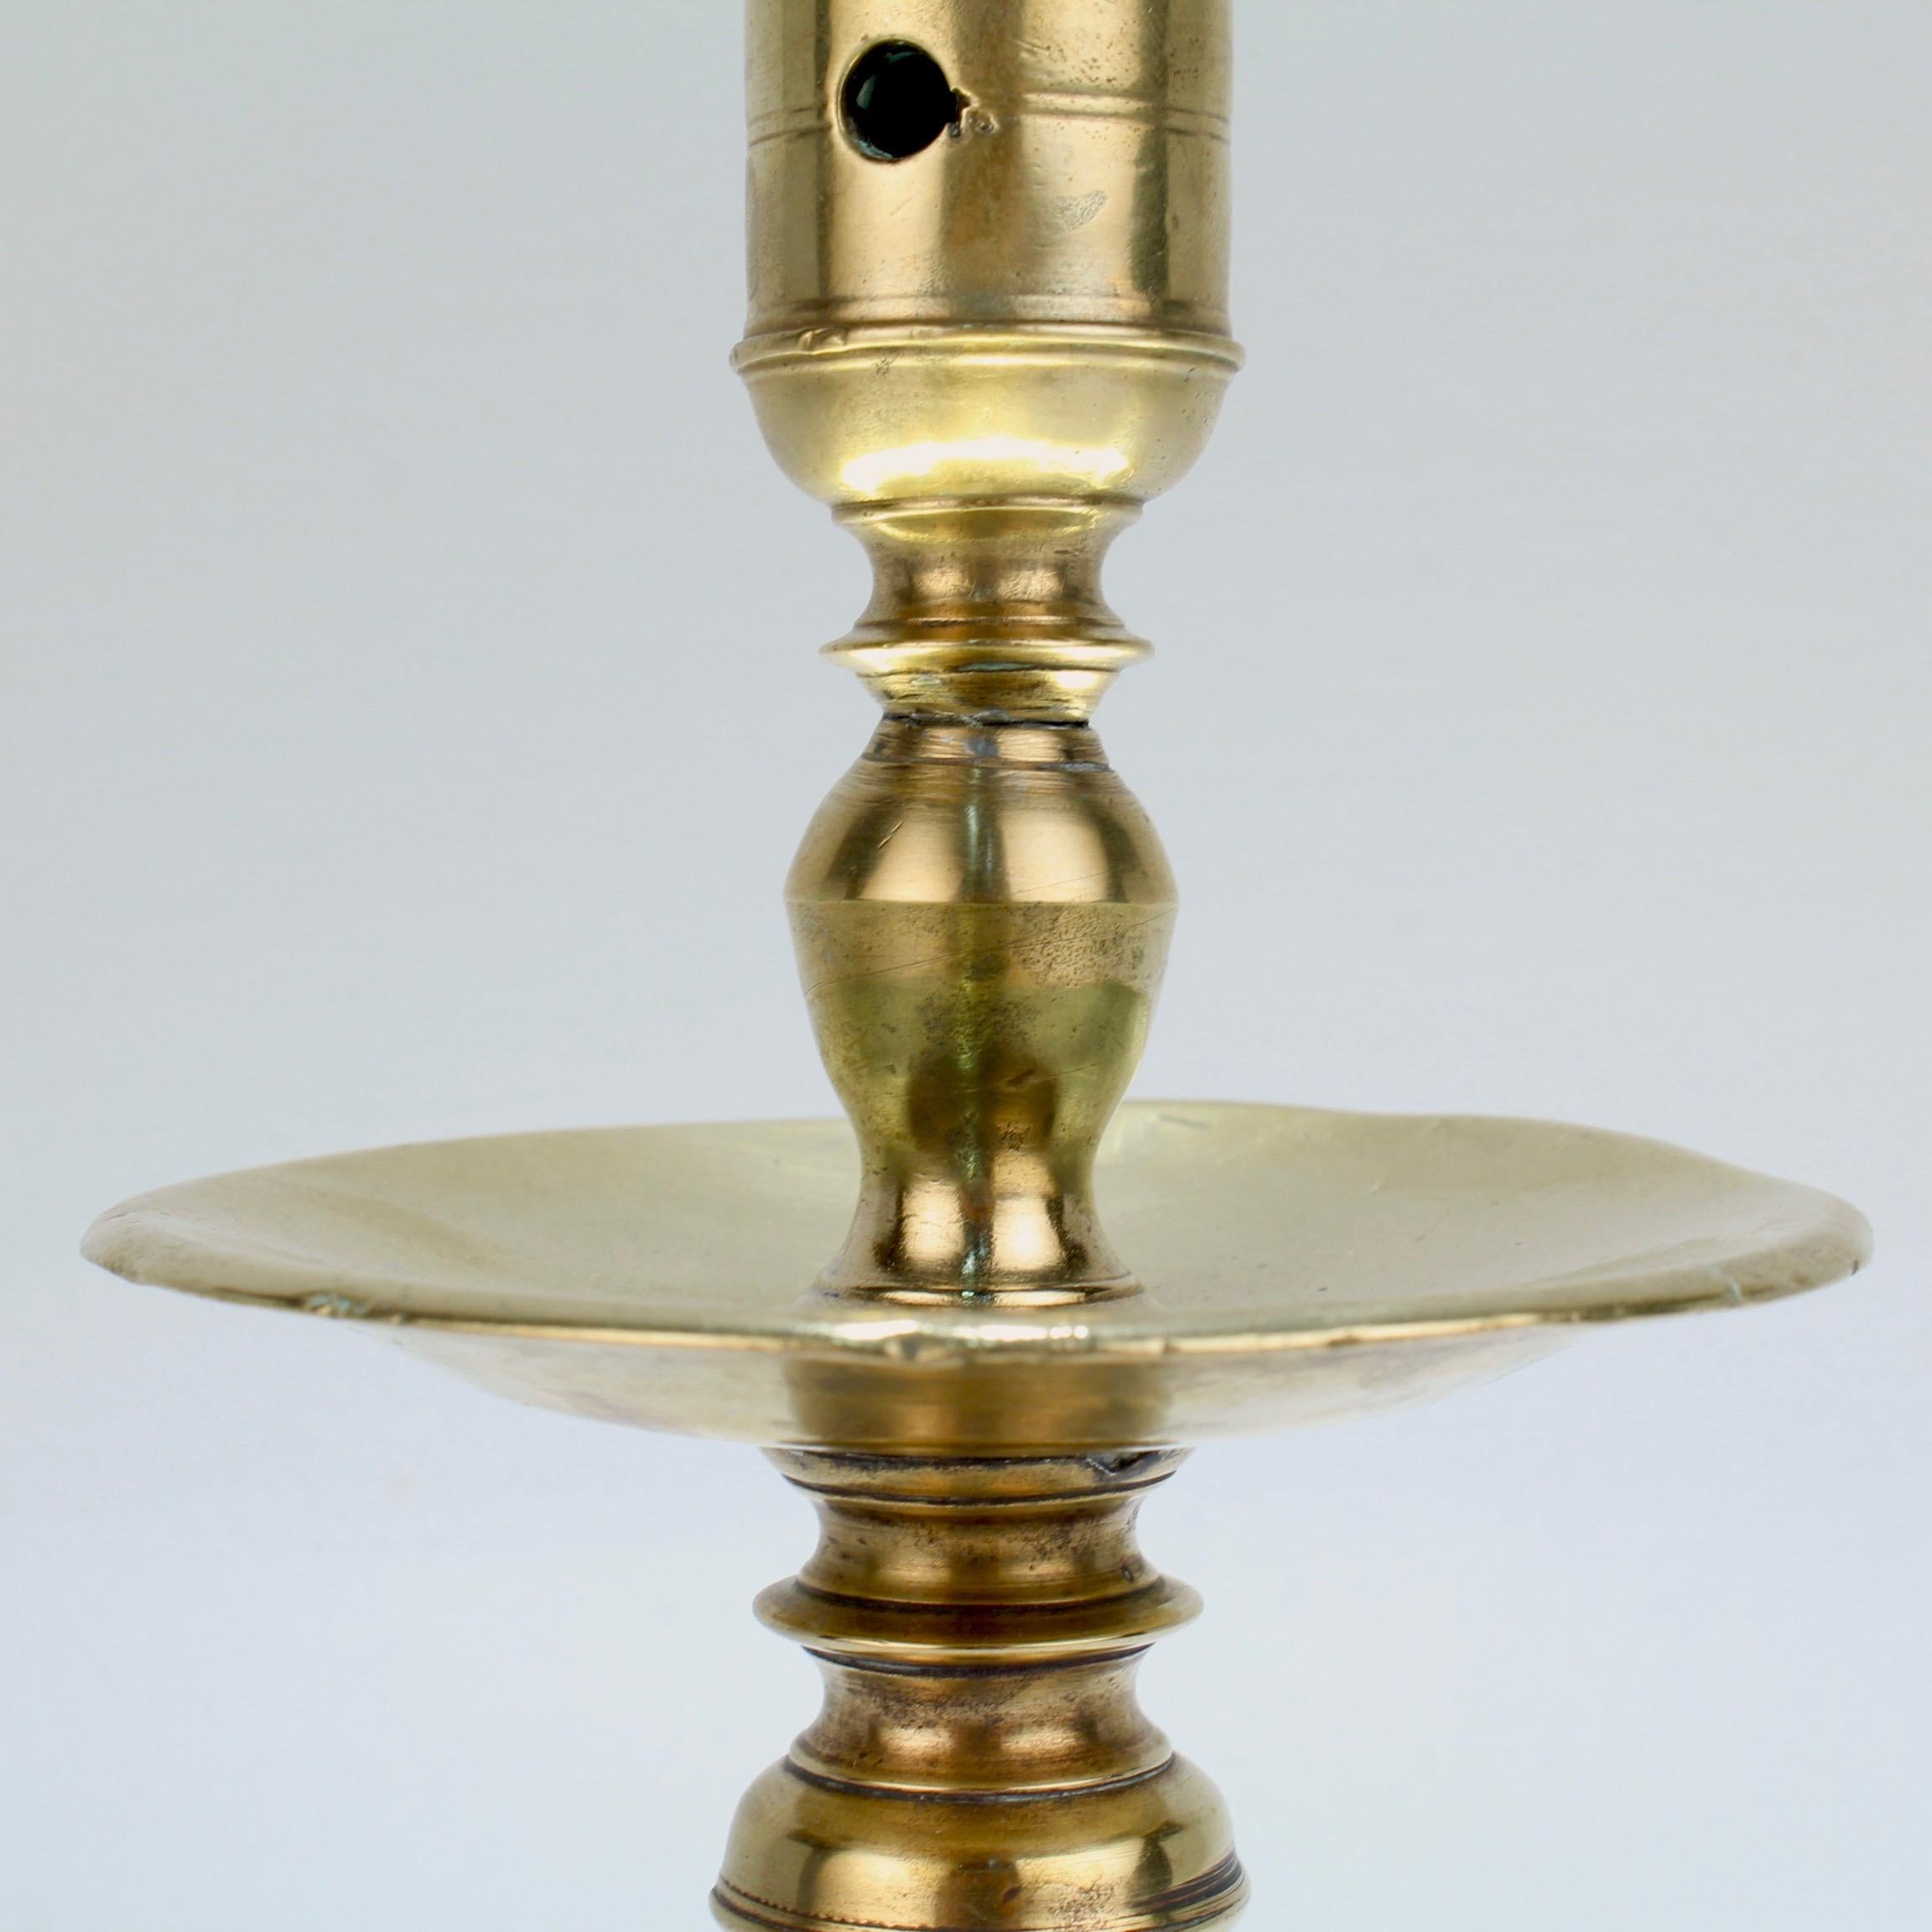 Antique 17th Century Dutch Brass Baluster Candlestick For Sale 2